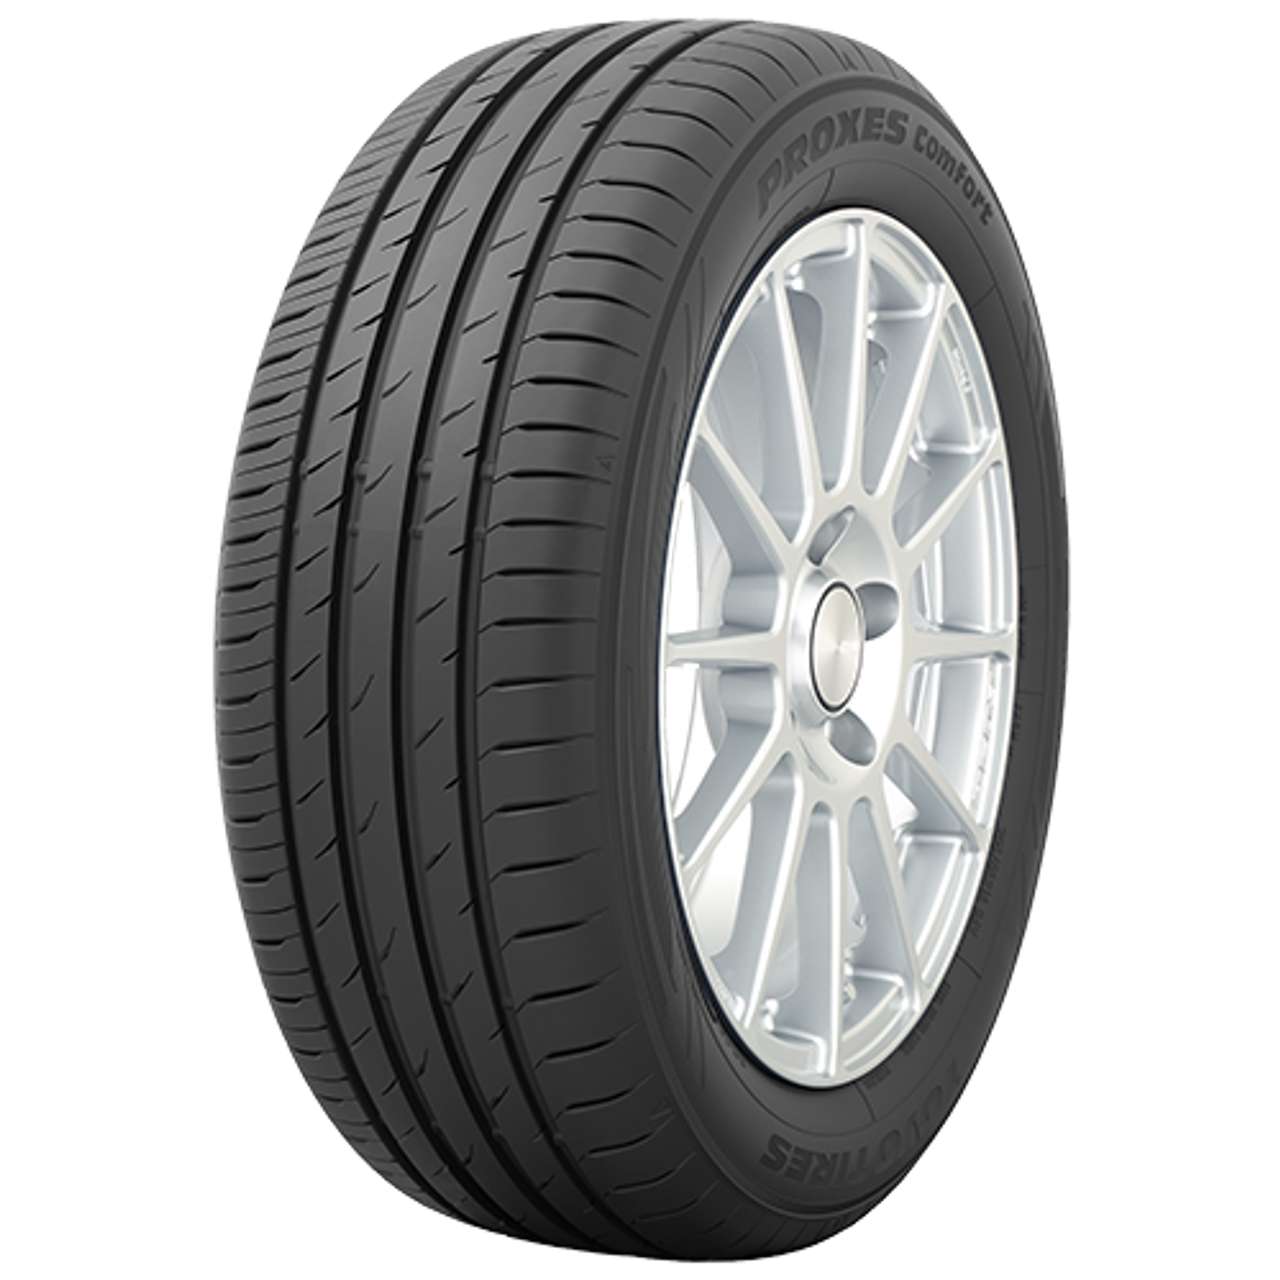 TOYO PROXES COMFORT SUV 225/55R18 102W BSW